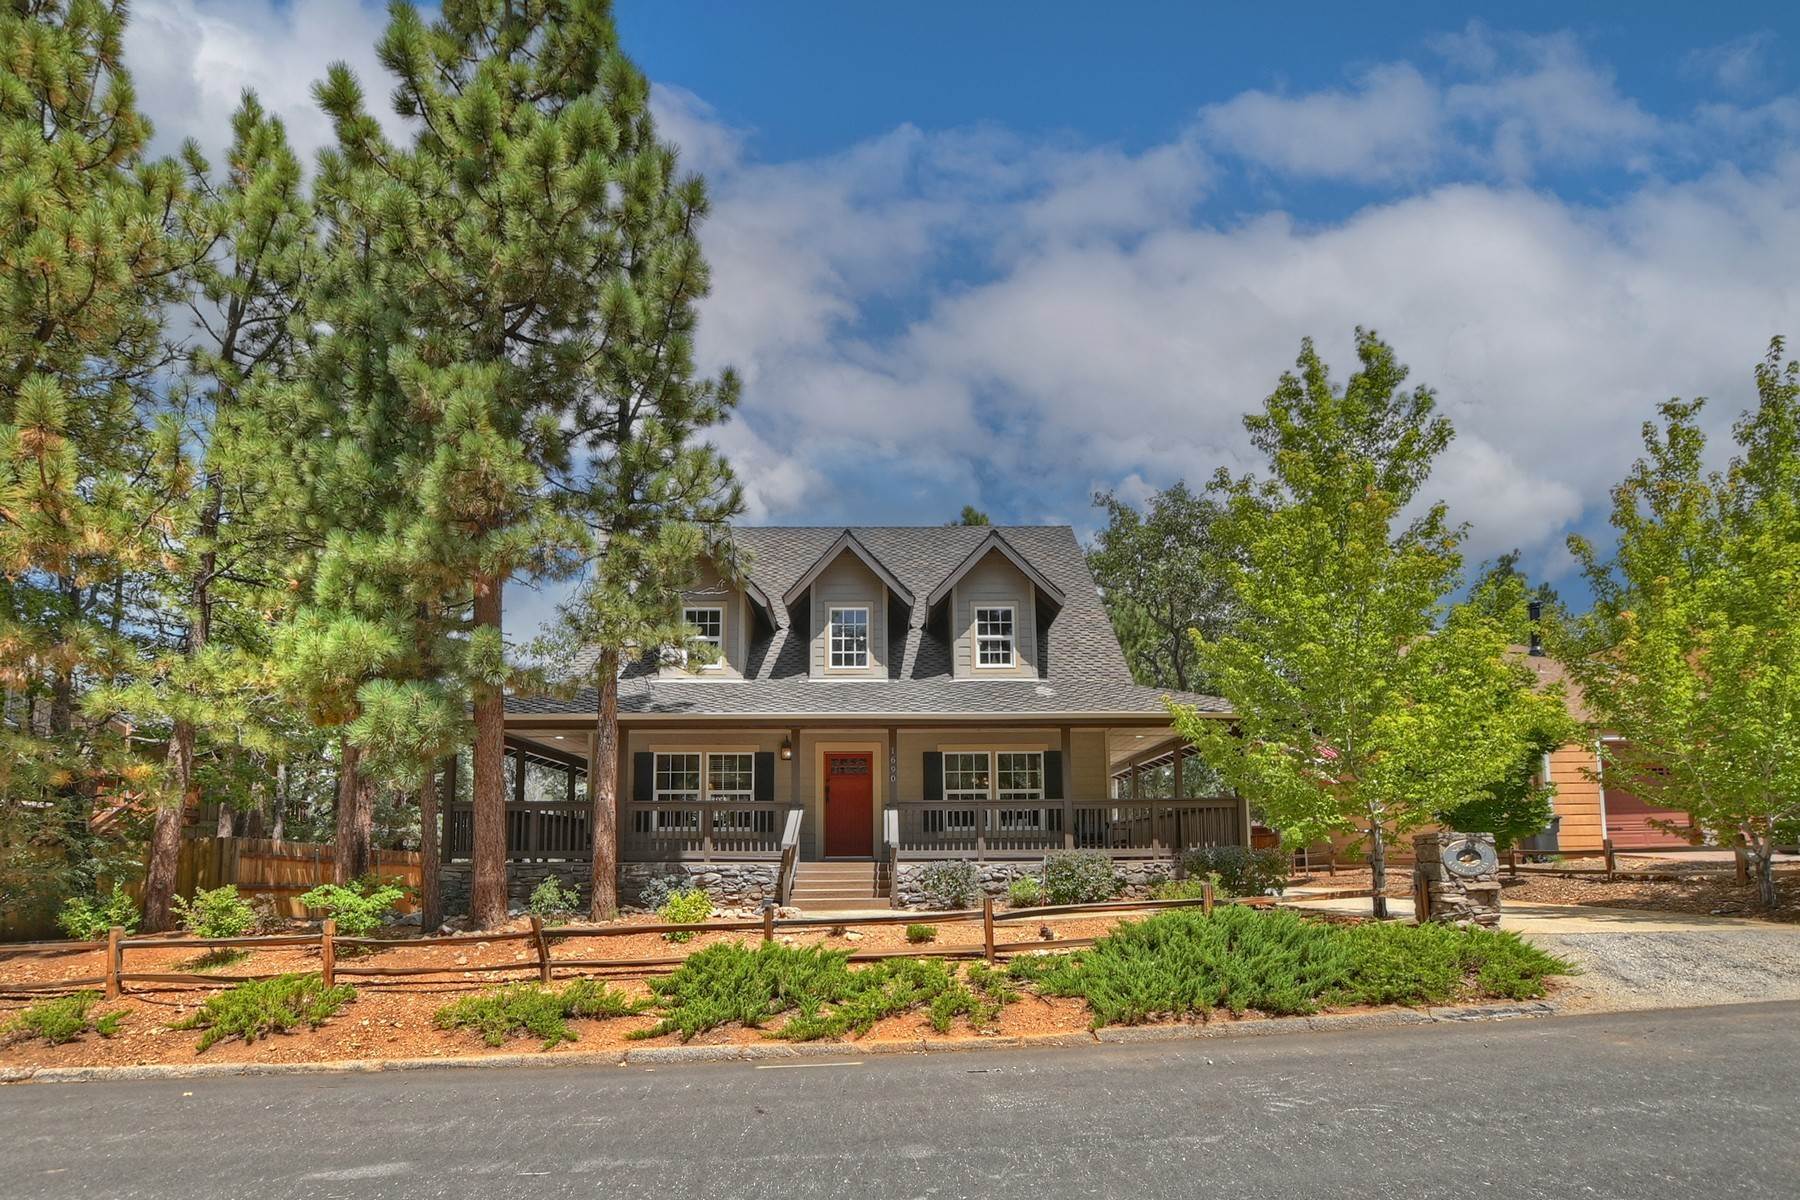 42. Single Family Homes for Sale at 1690 Cascade Road, Big Bear City, CA 92314 1690 Cascade Road Big Bear City, California 92314 United States